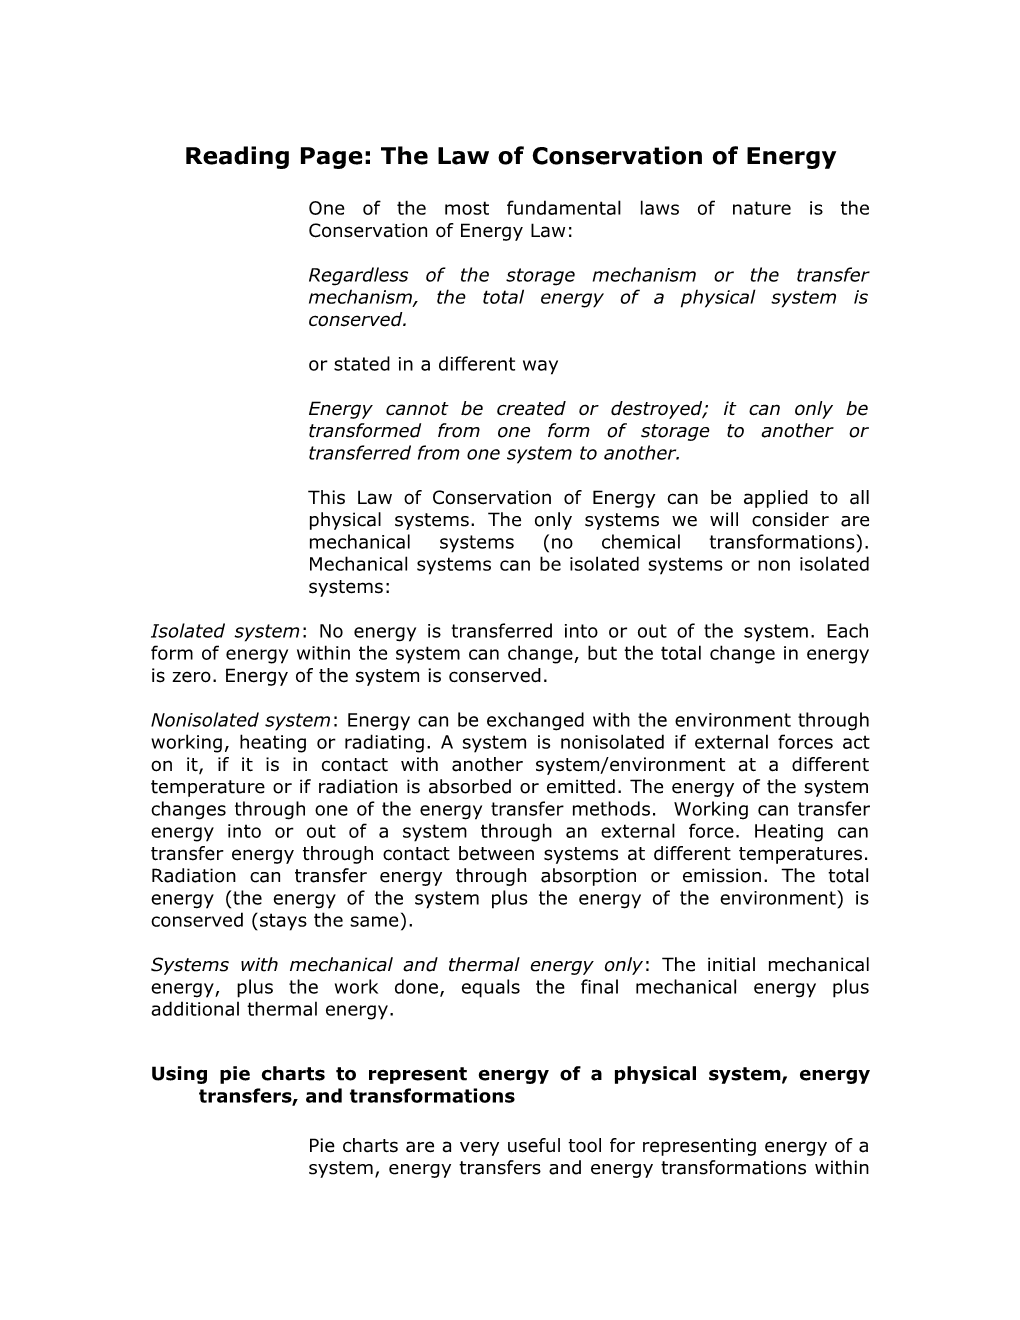 Reading Page: the Law of Conservation of Energy